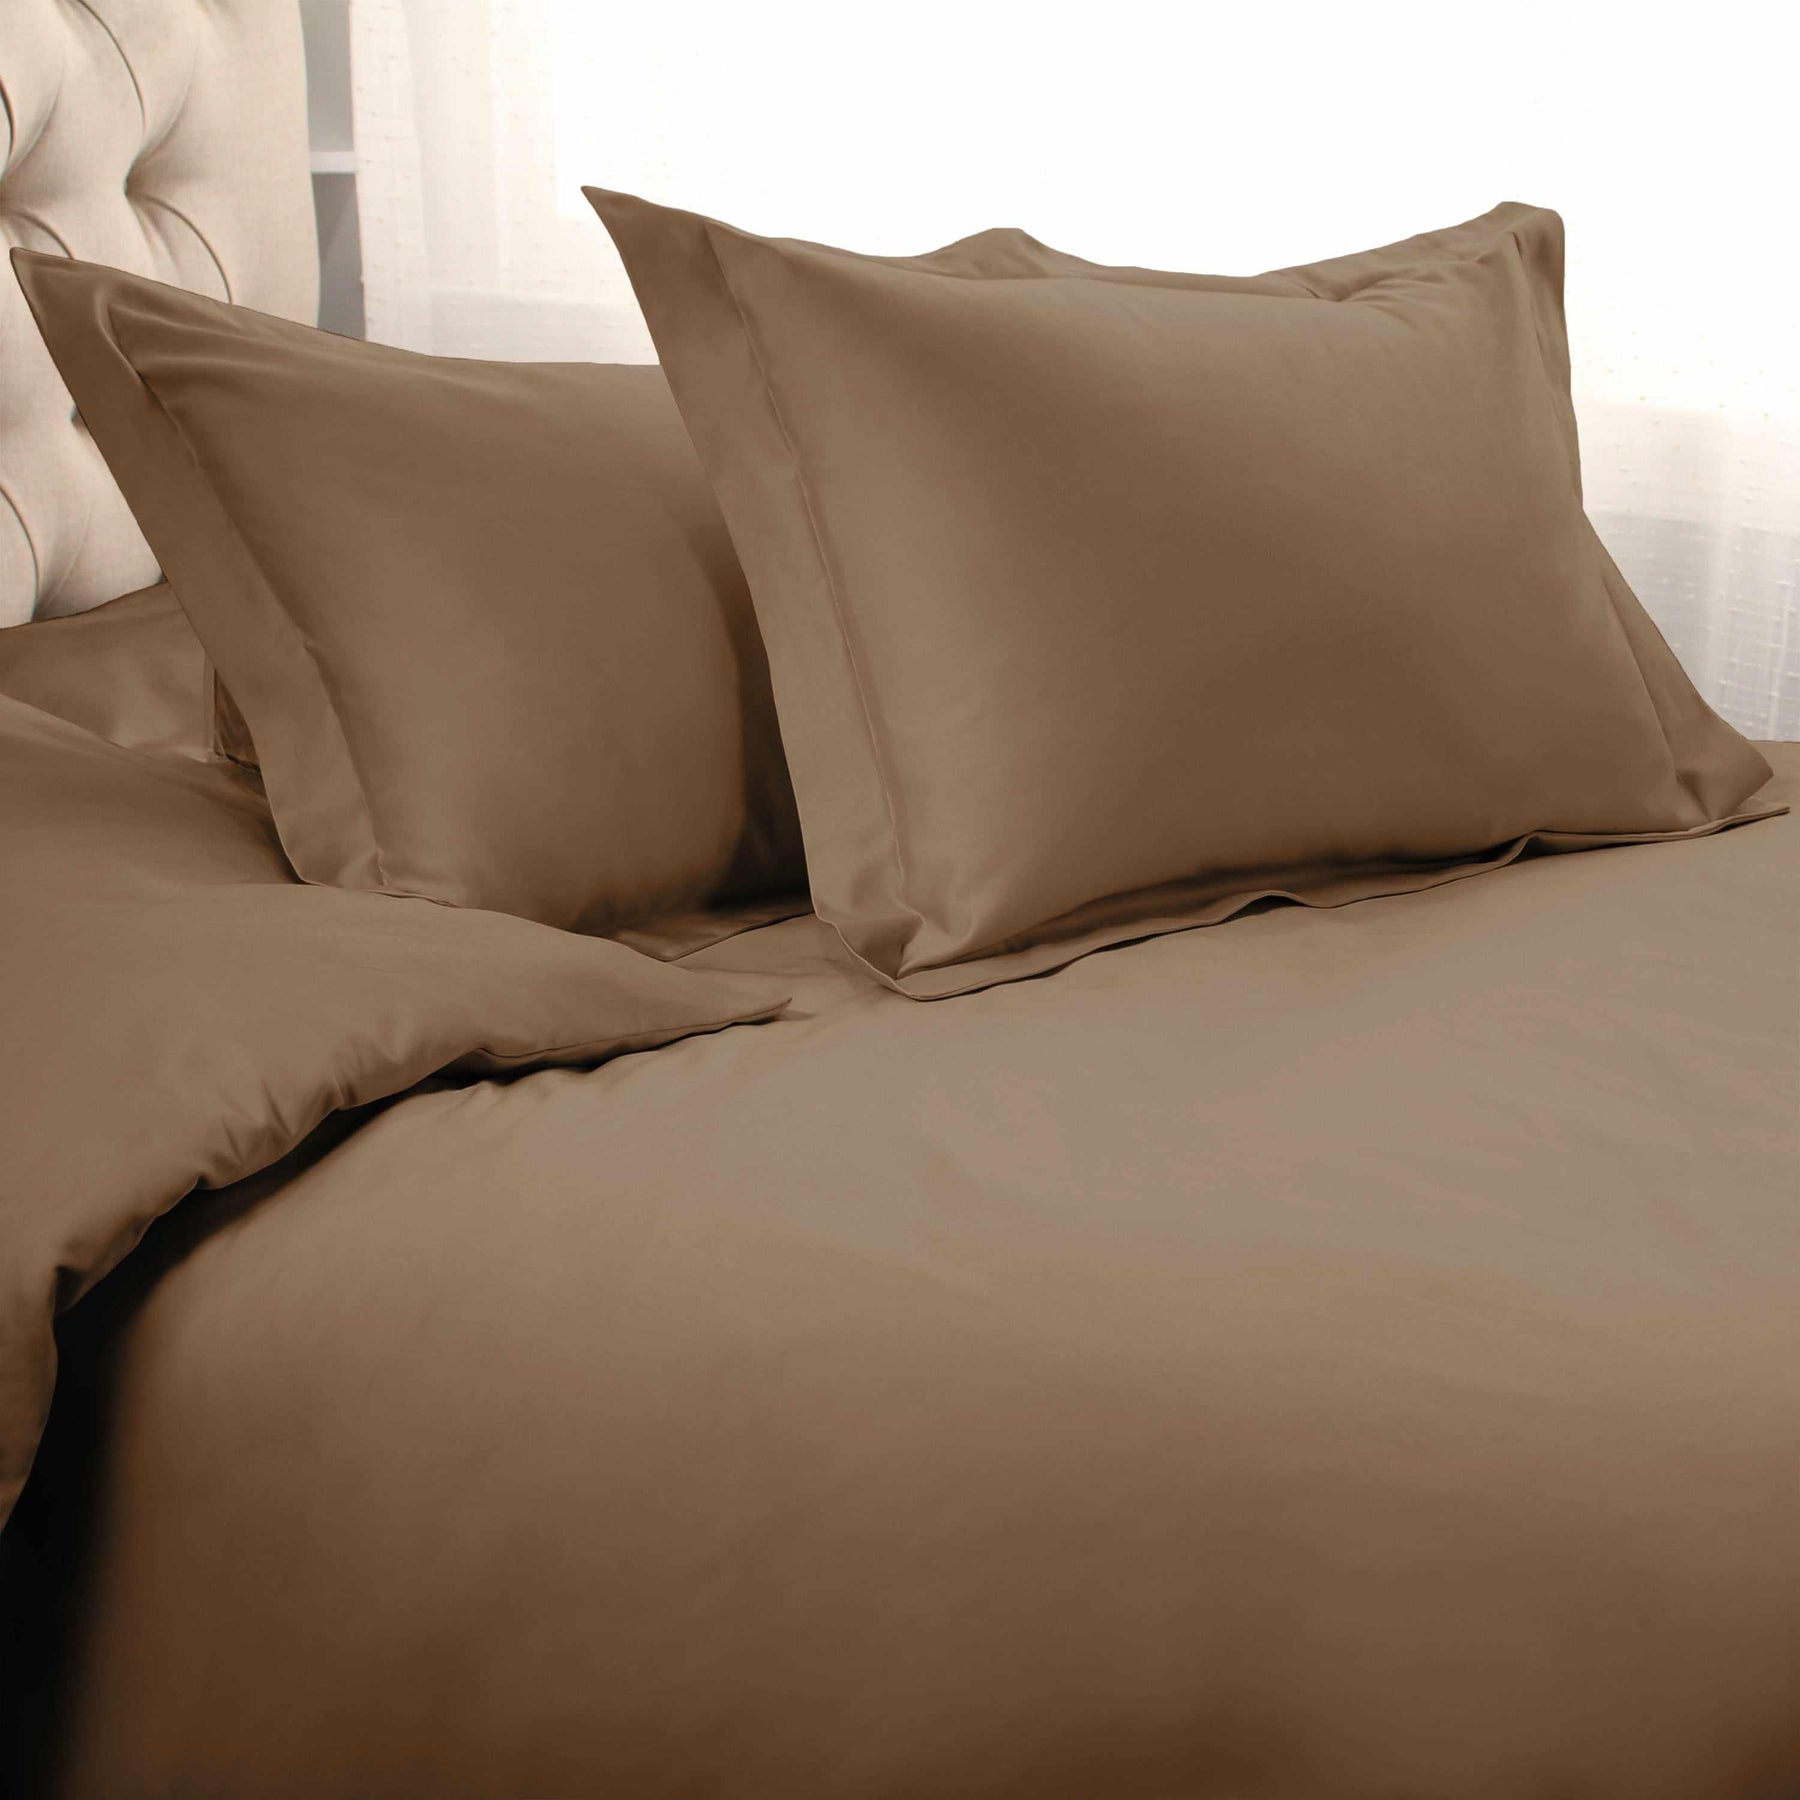  Superior Egyptian Cotton Solid All-Season Duvet Cover Set with Button Closure - taupe